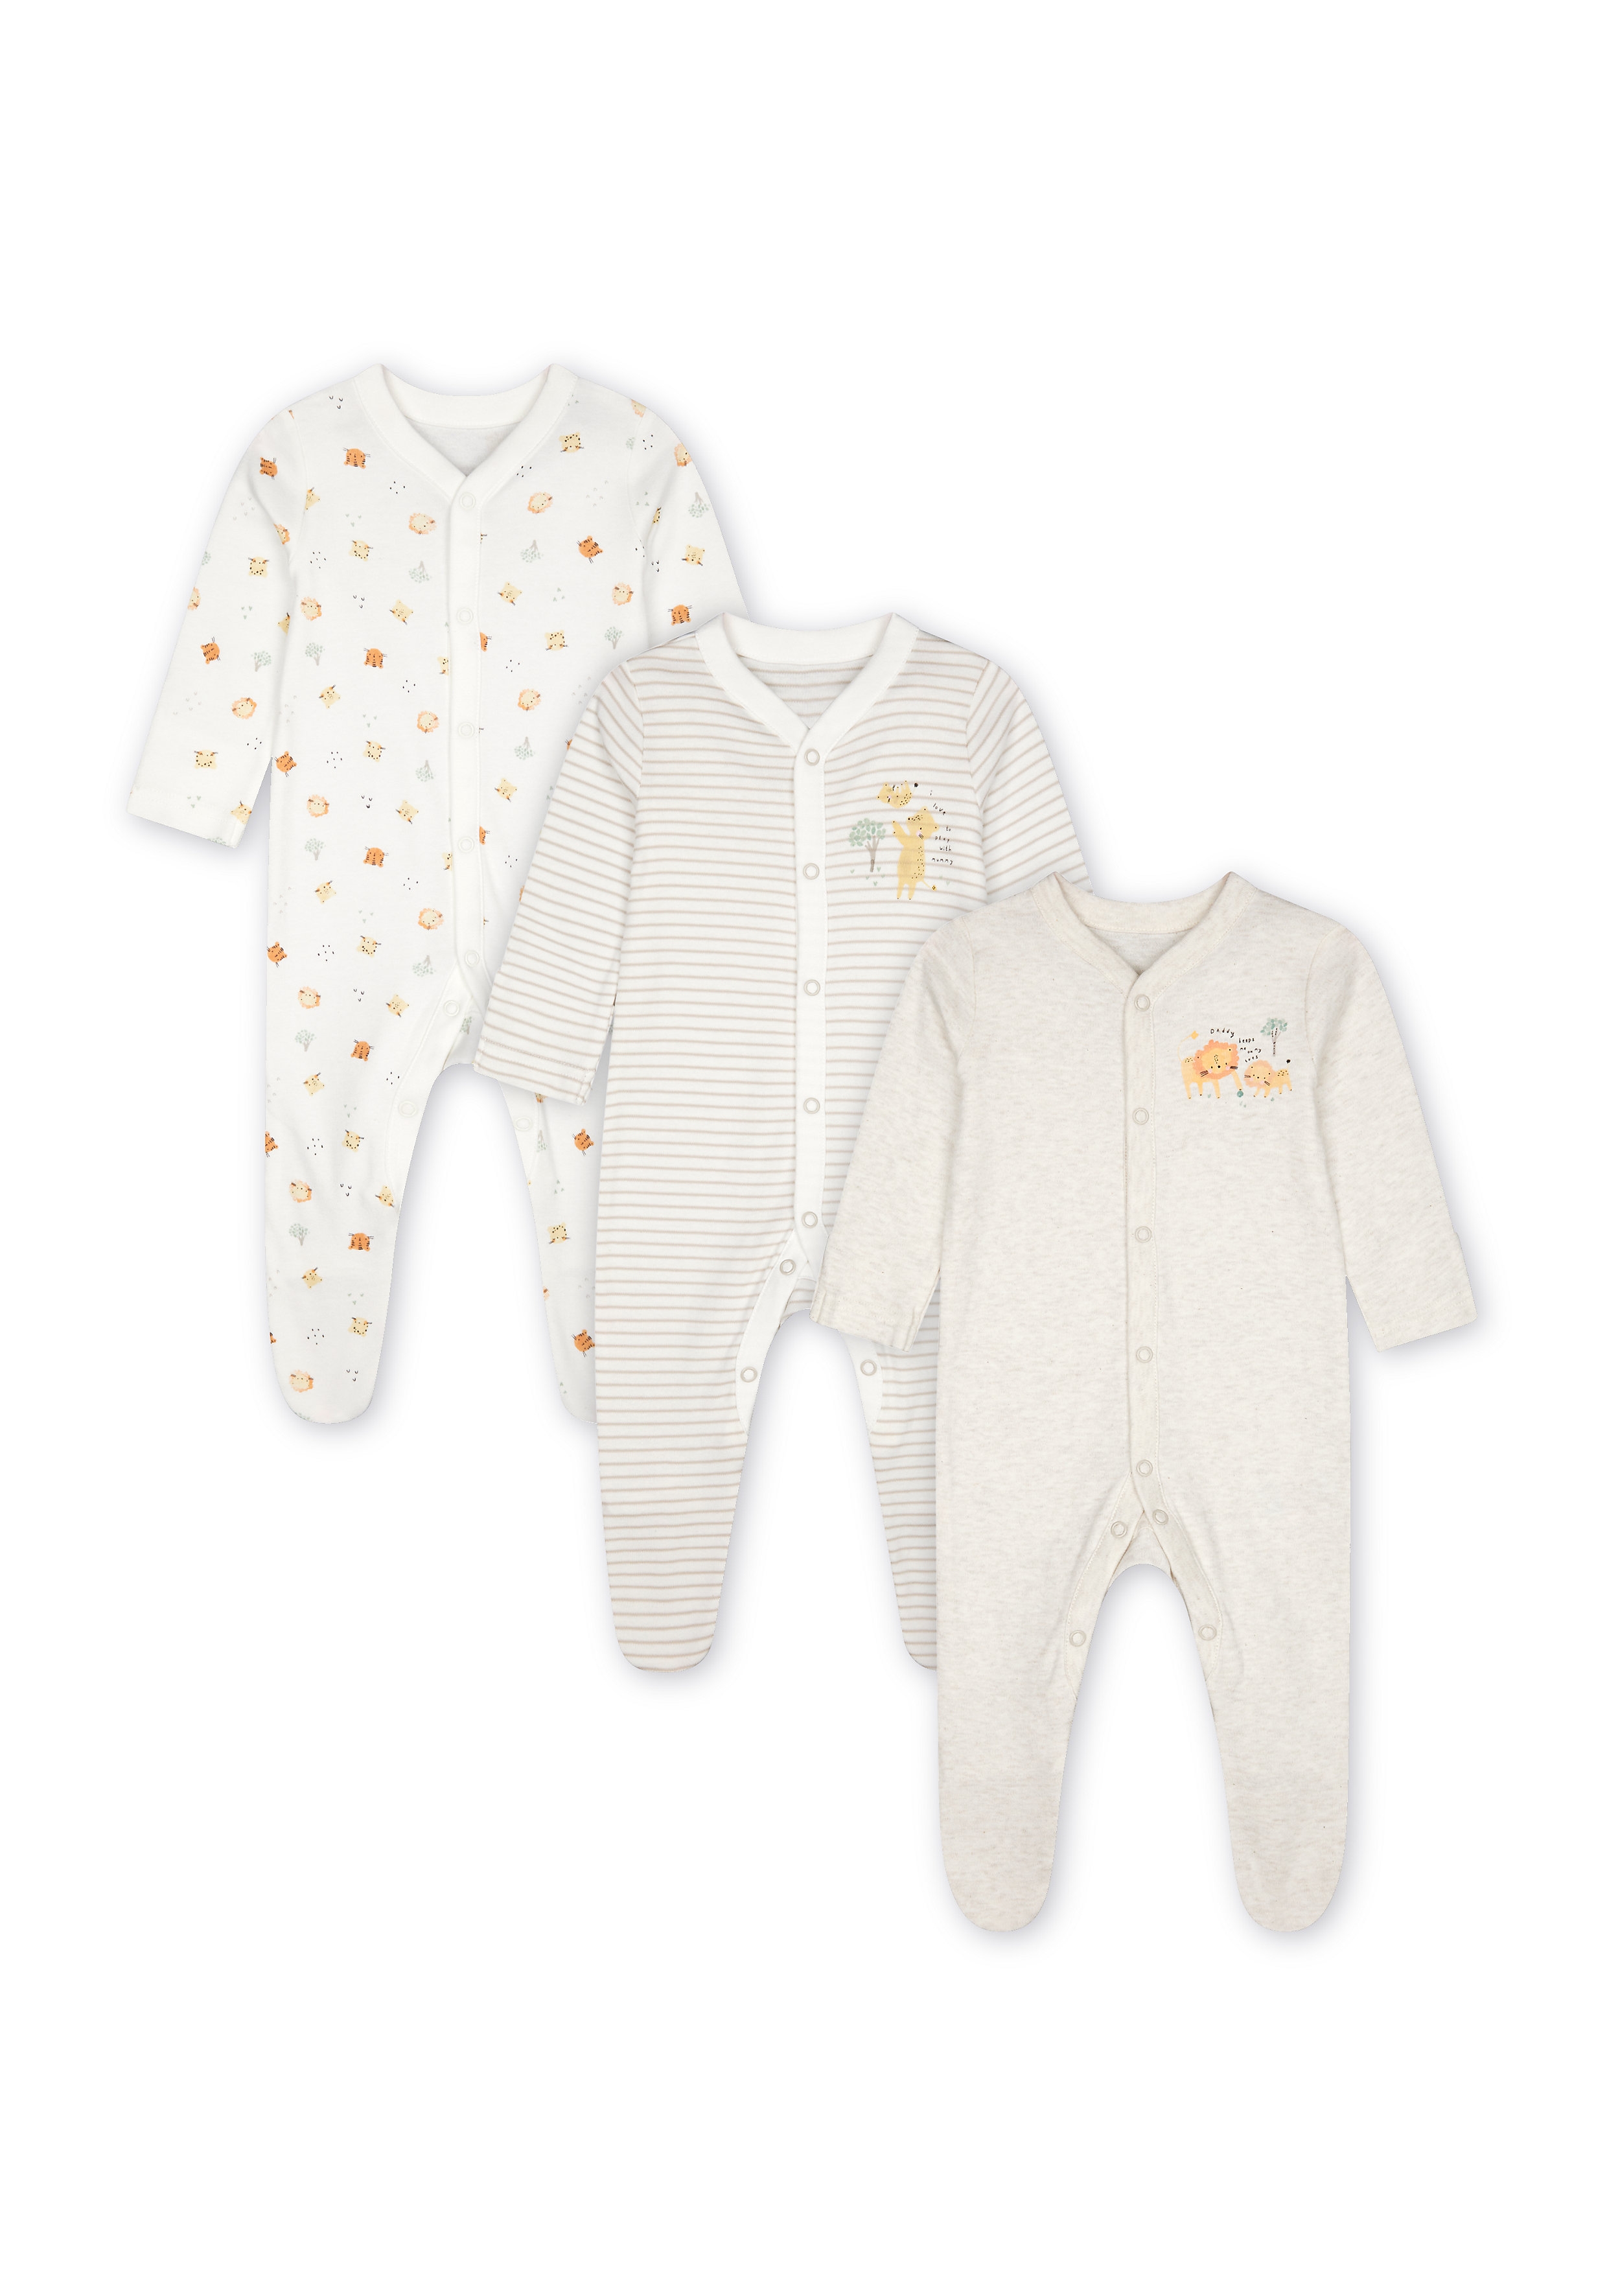 Mothercare | Unisex Sleepsuit Stripes And Animal Print  - Pack Of 3 - Cream 0